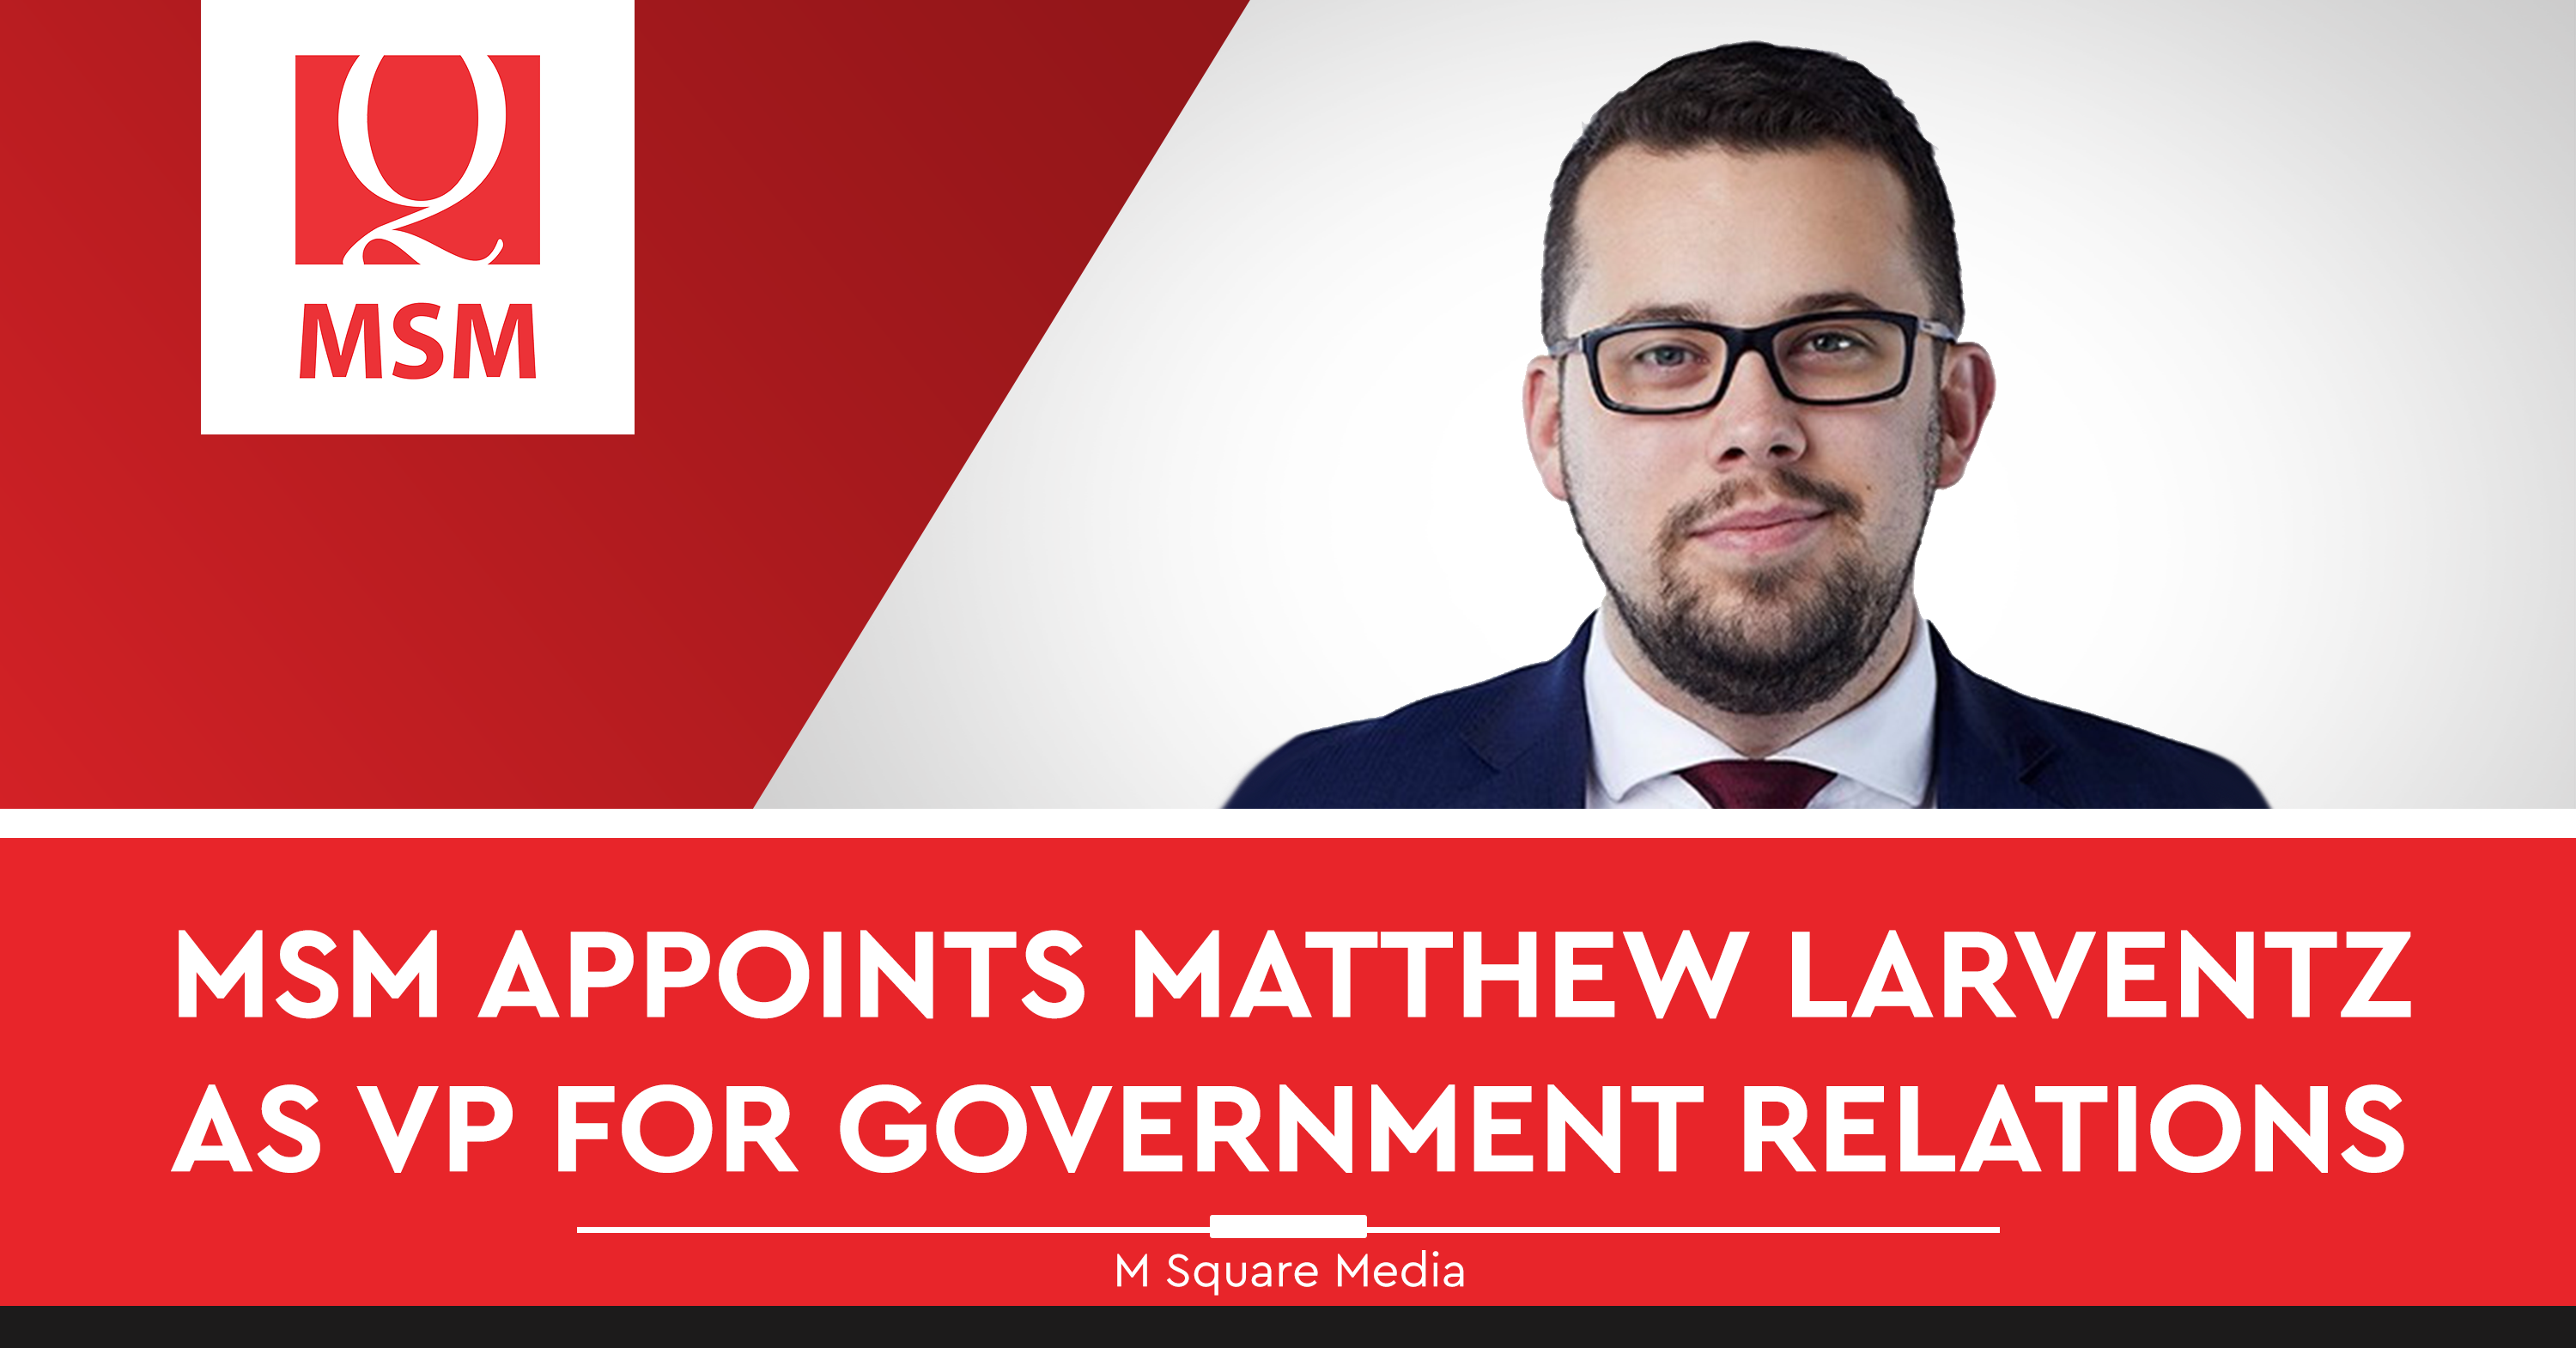 M Square Media MSM Appoints Matthew Larvents as VP for Government Relations Web Banner